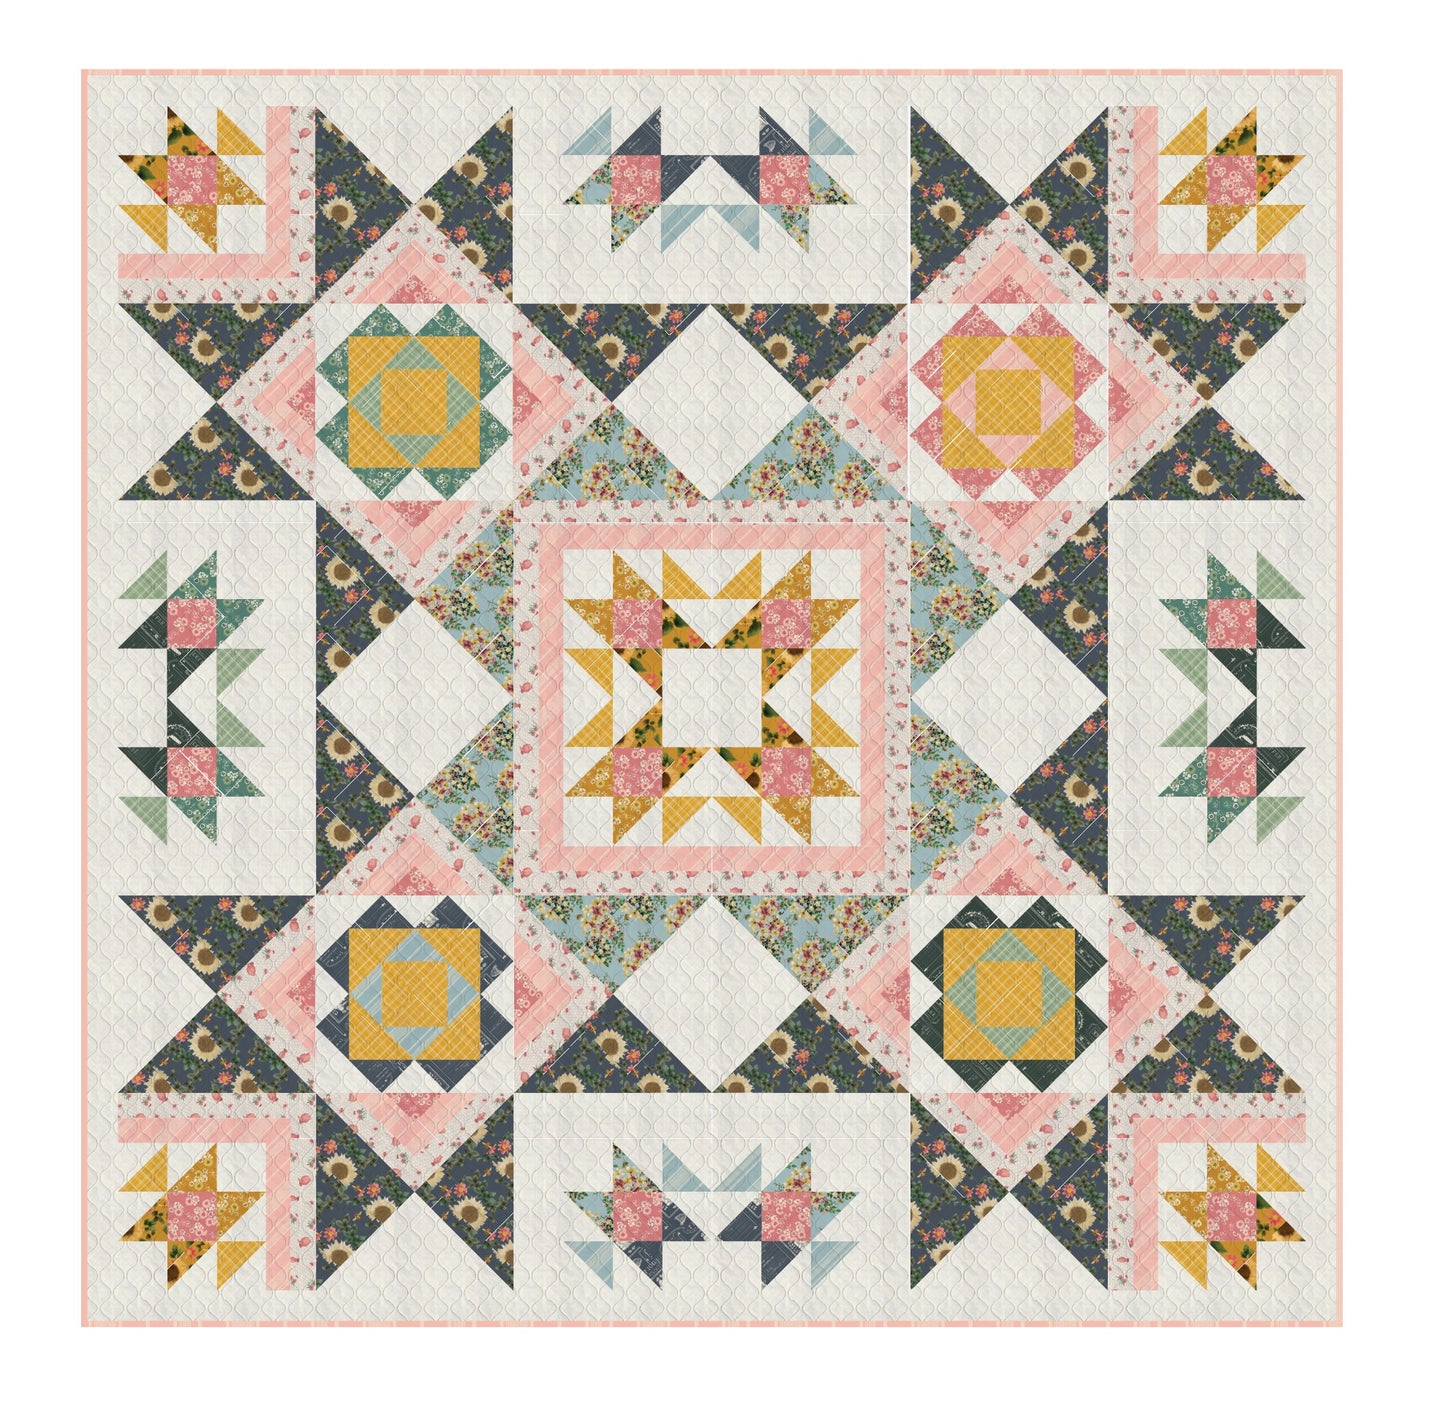 Dawn Song Quilt Pattern